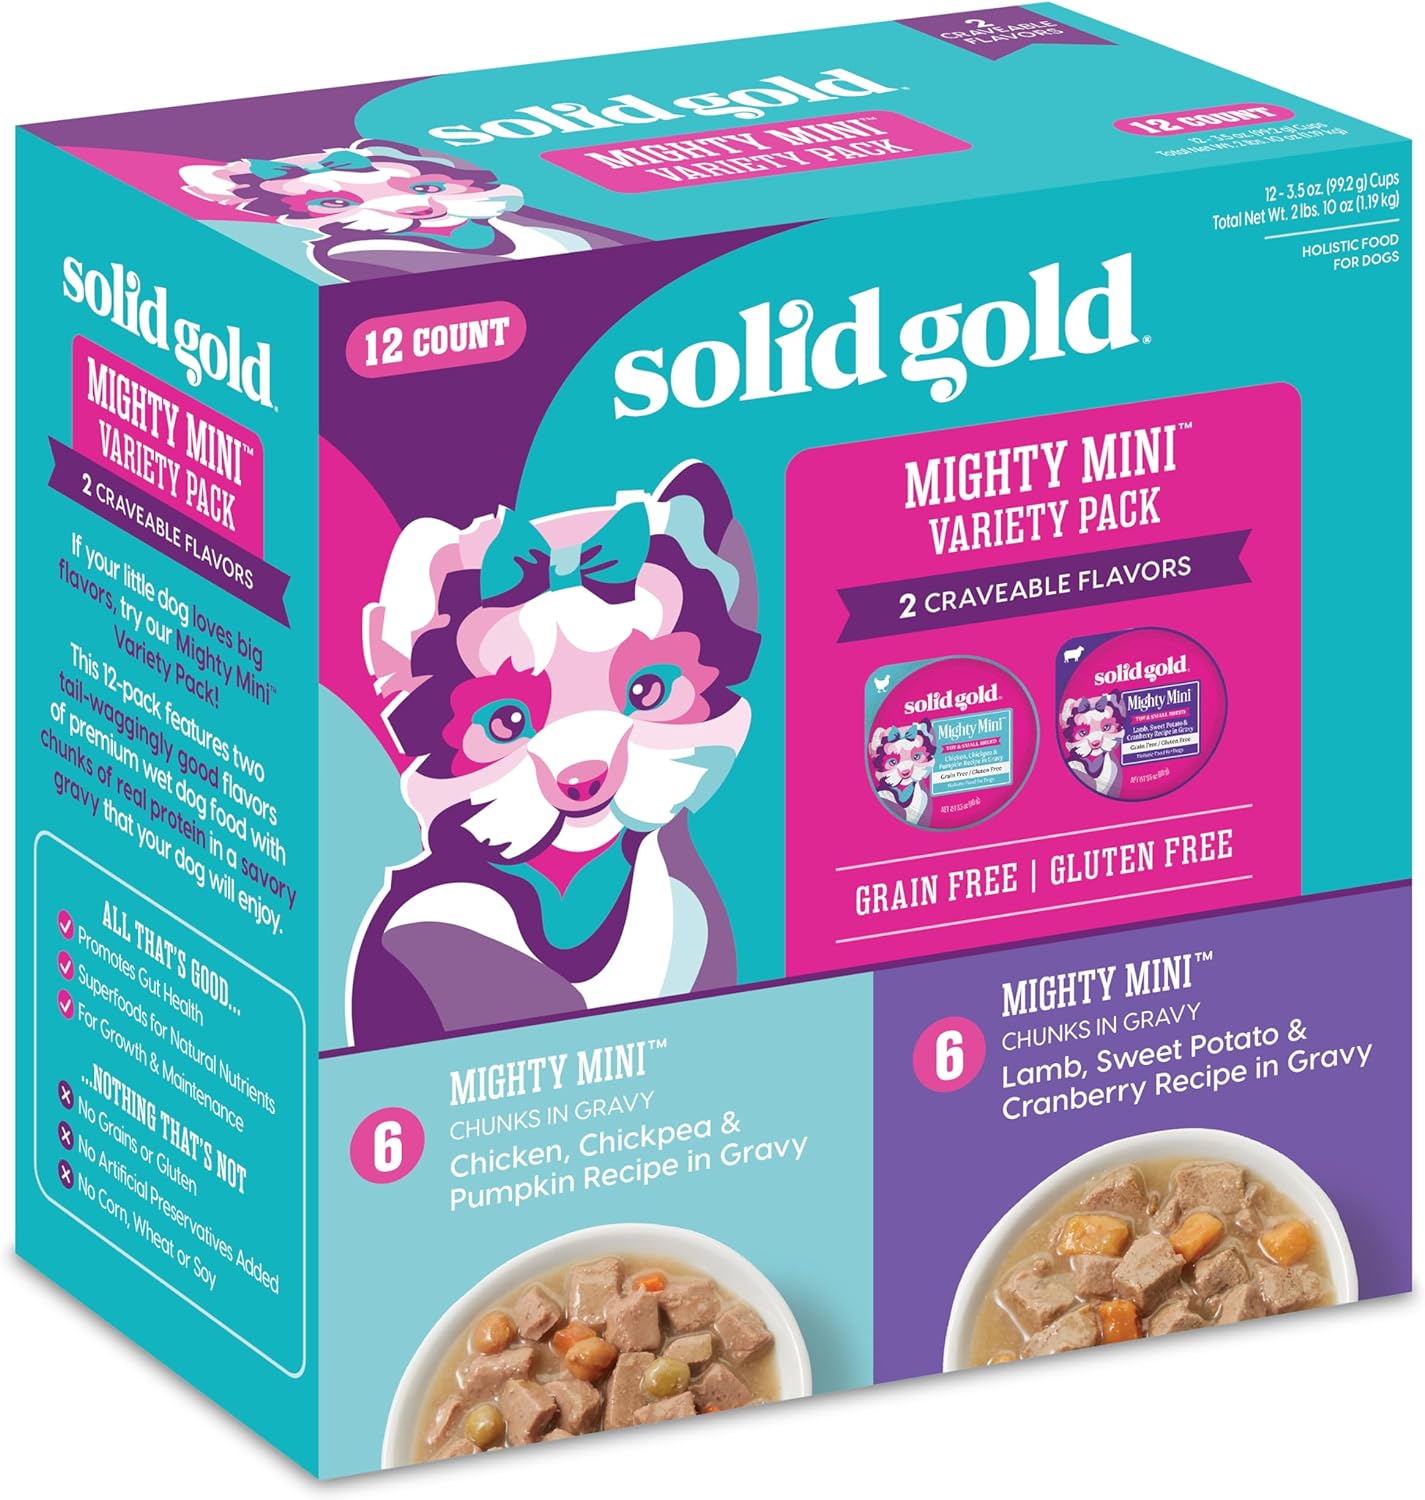 Solid Gold Wet Dog Food Variety Pack for Small Dogs - Mighty Mini Grain Free Wet Dog Food Made with Real Protein - for Puppies, Adult & Senior Small Breeds with Sensitive Stomachs - 12 Pack